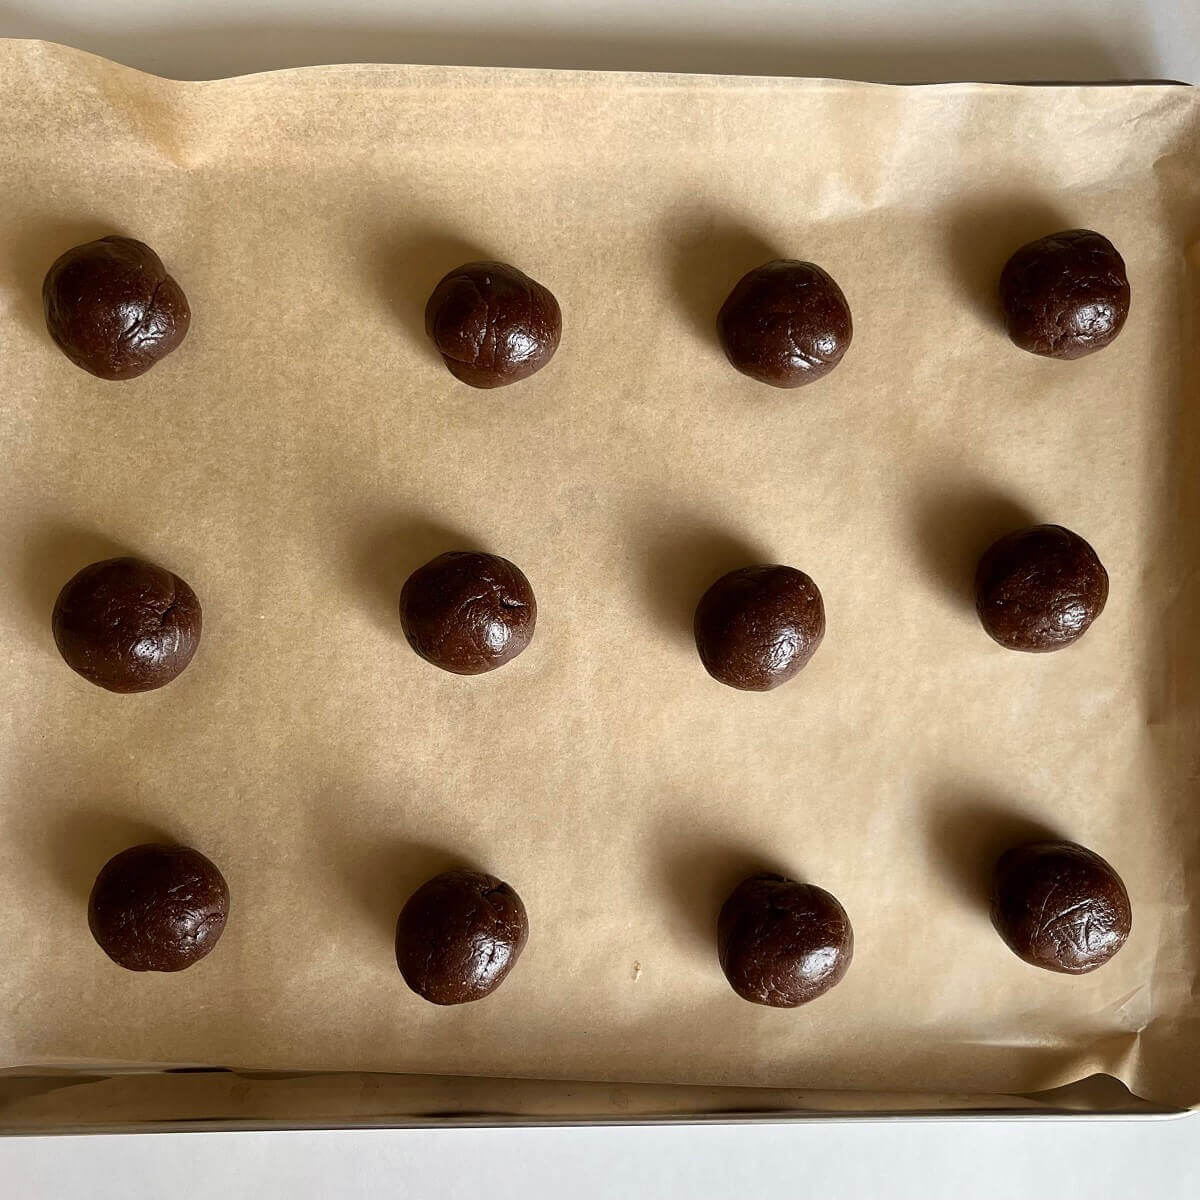 Carob dough balls on a sheet pan lined with parchment paper.